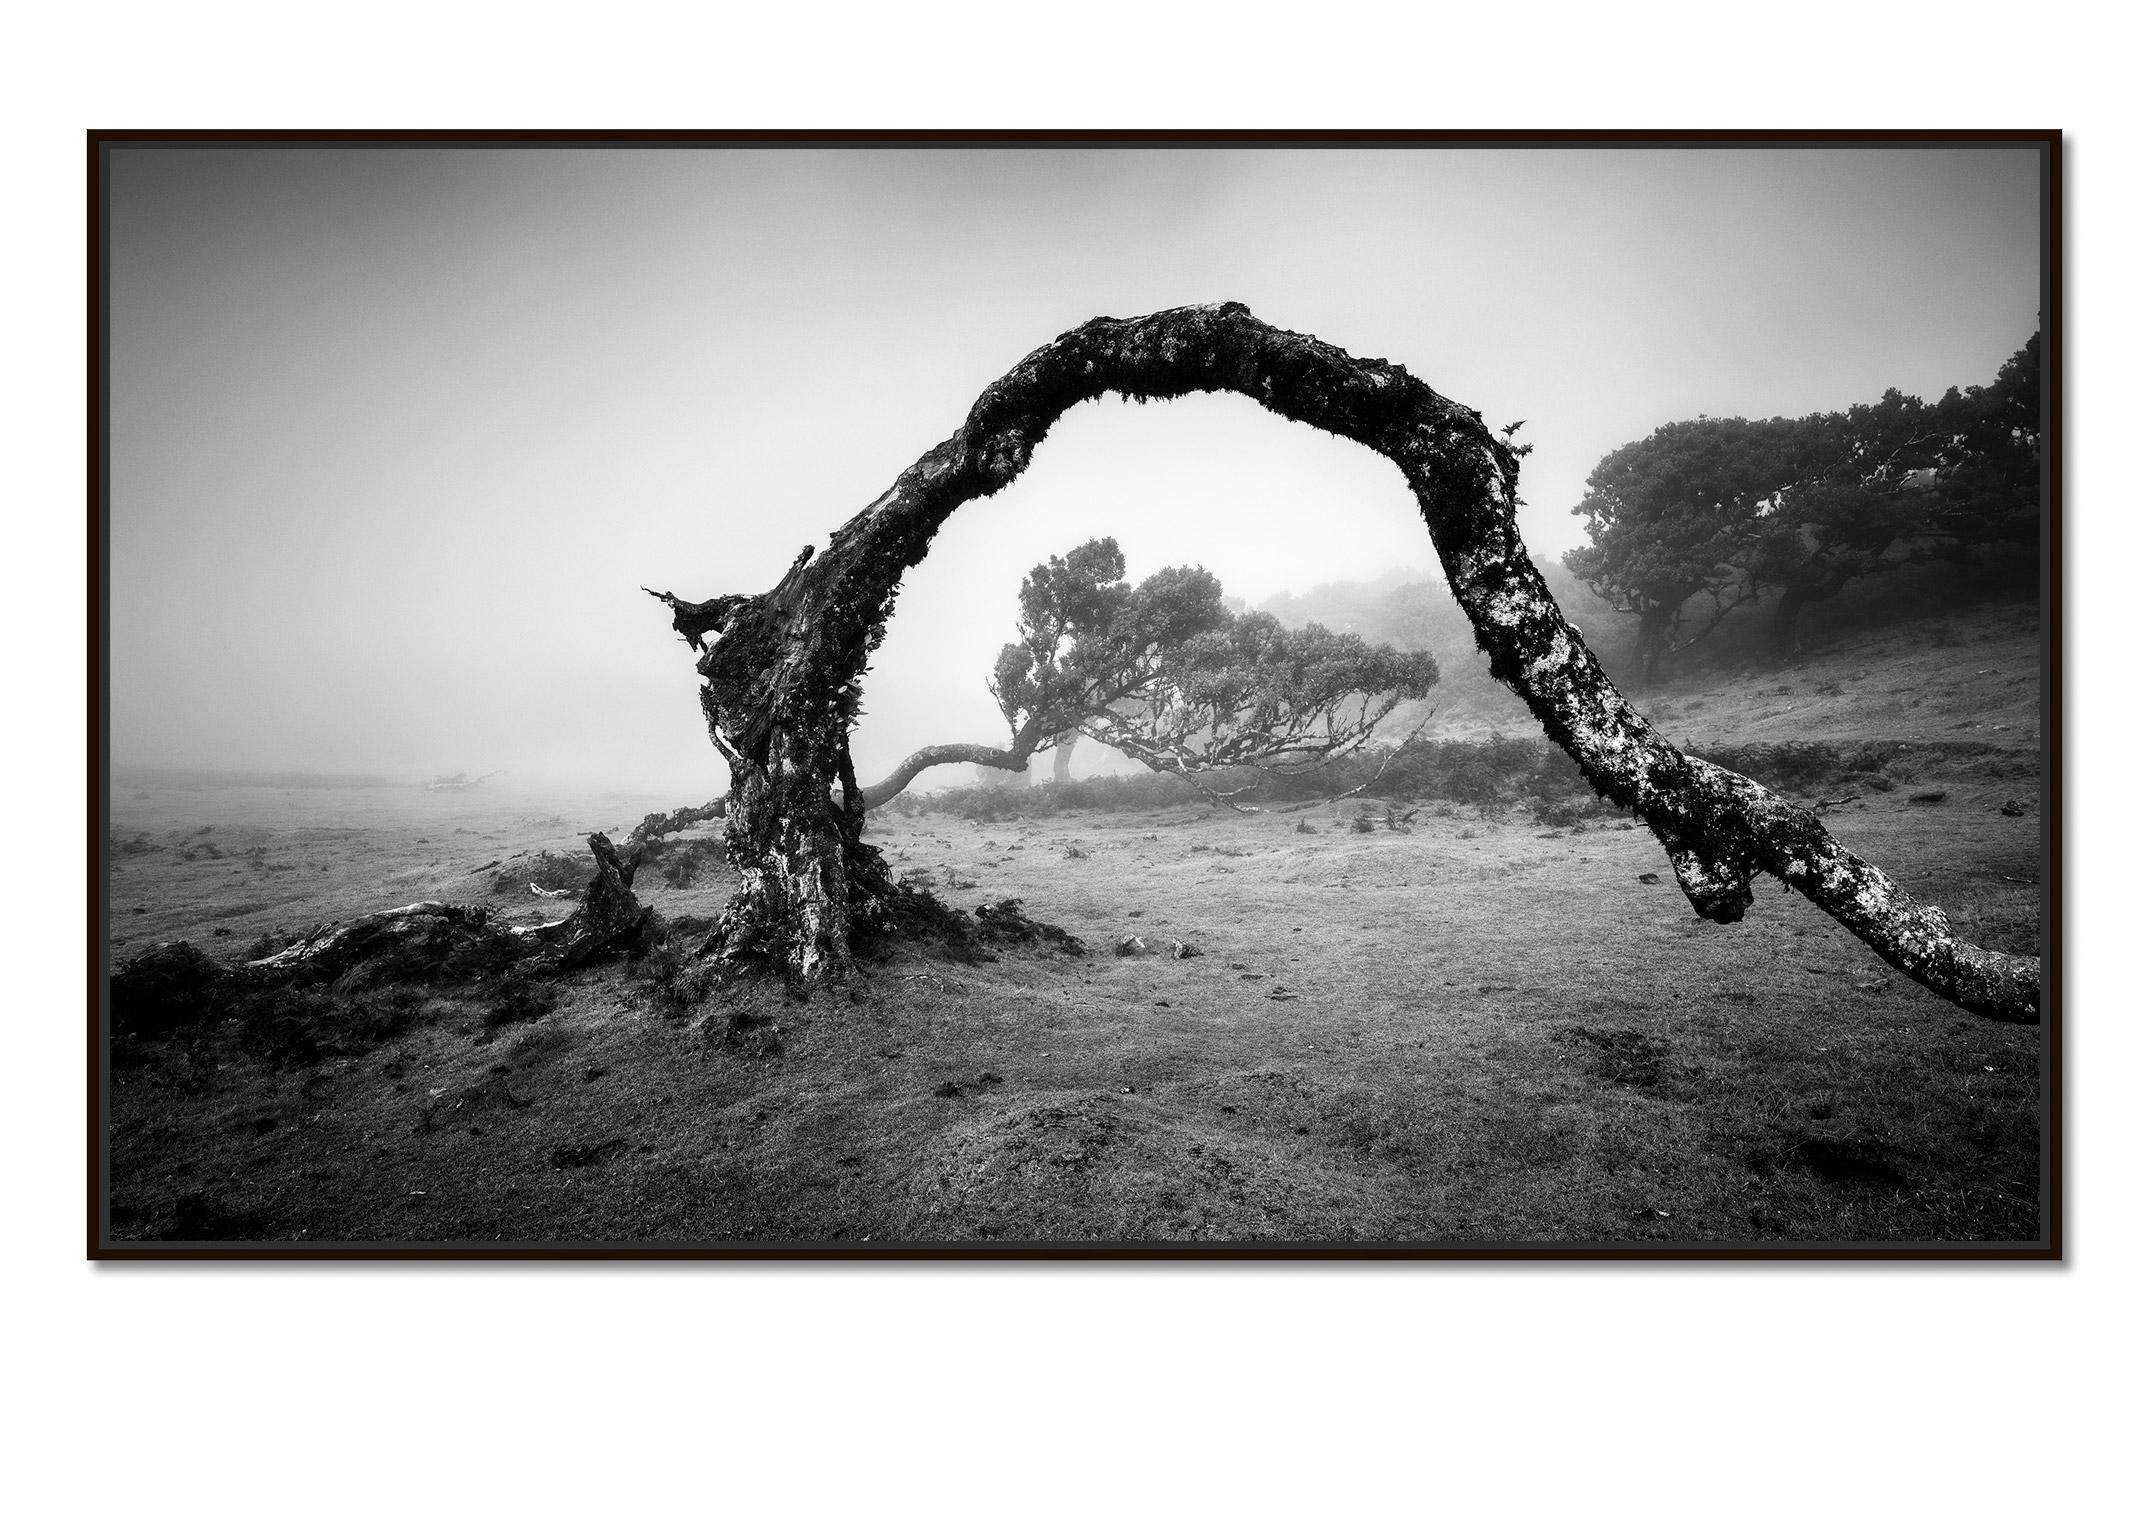 Bent Tree in the fog, Madeira, black and white panorama landscape photography - Photograph by Gerald Berghammer